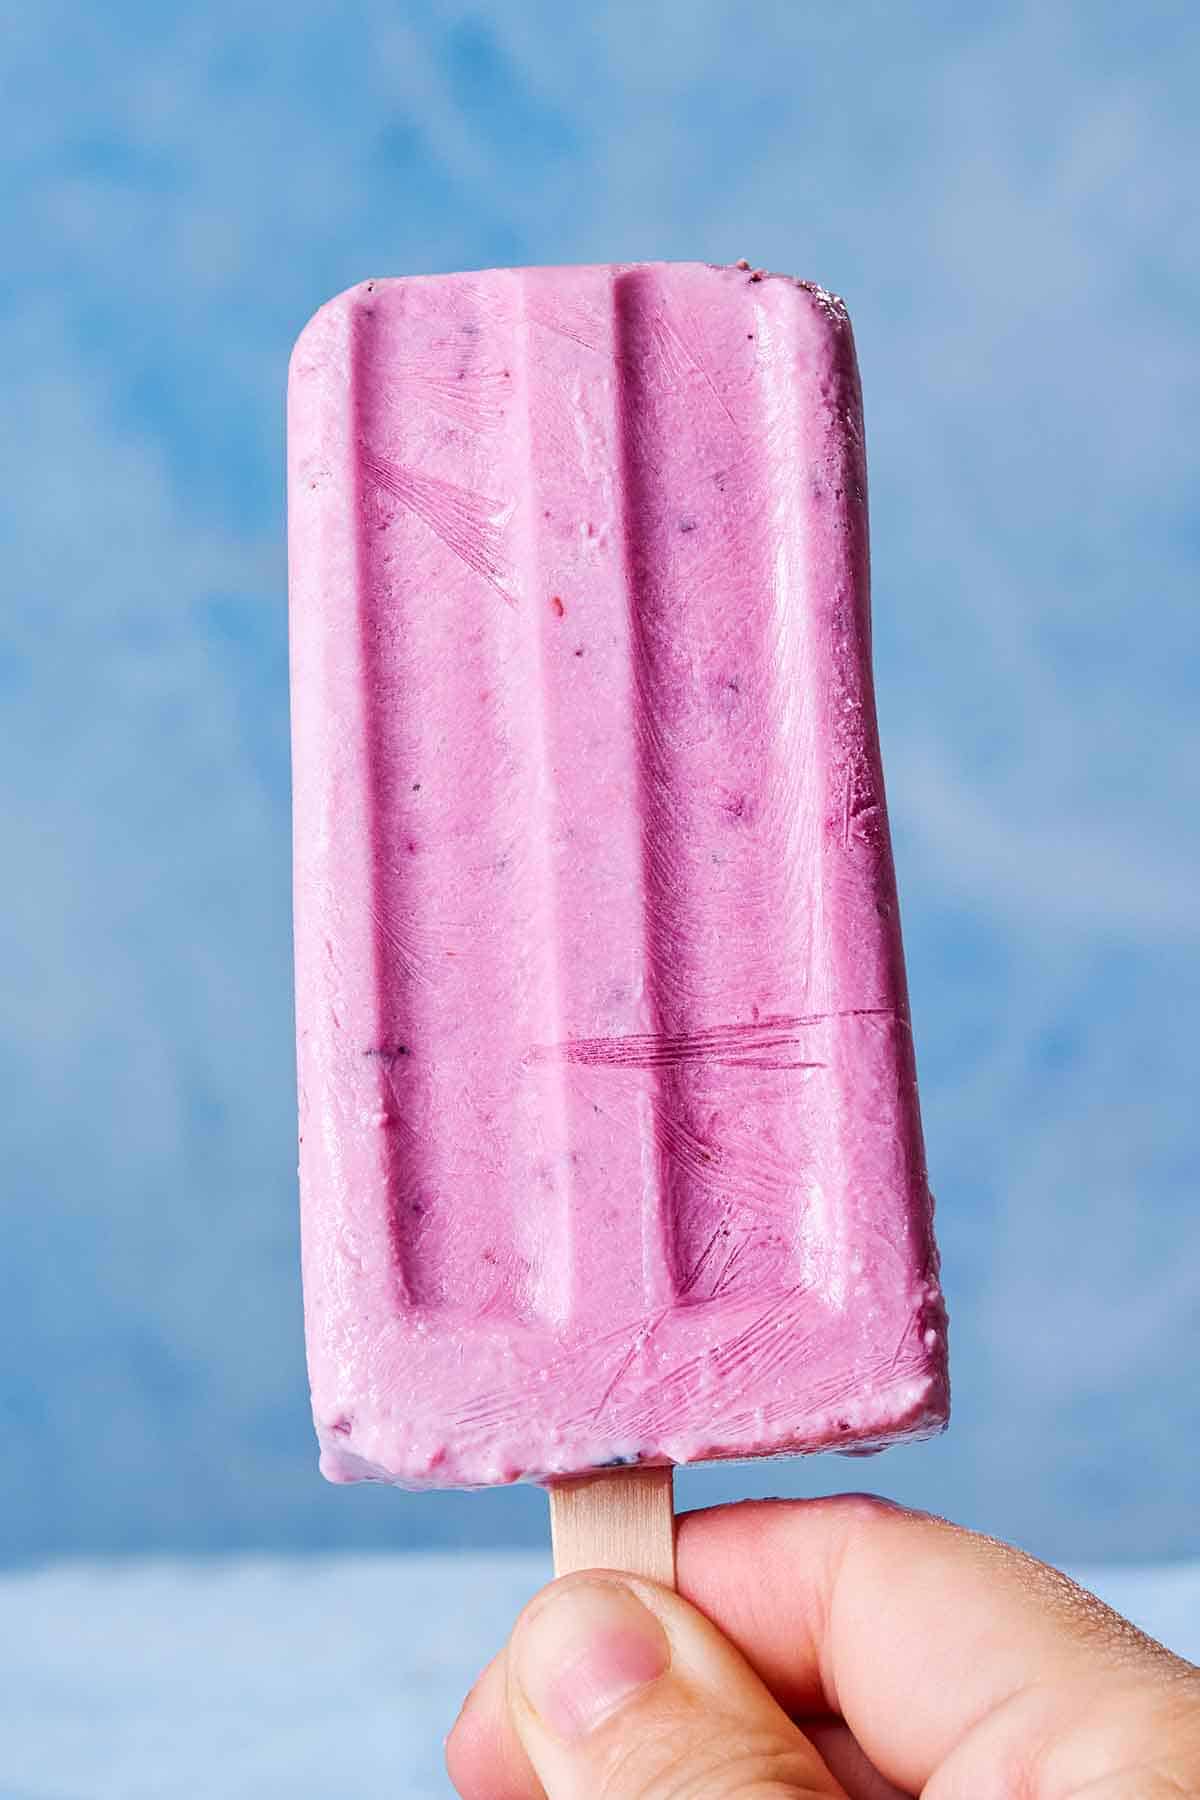 A close up of a hand holding a yogurt berry homemade popsicle.